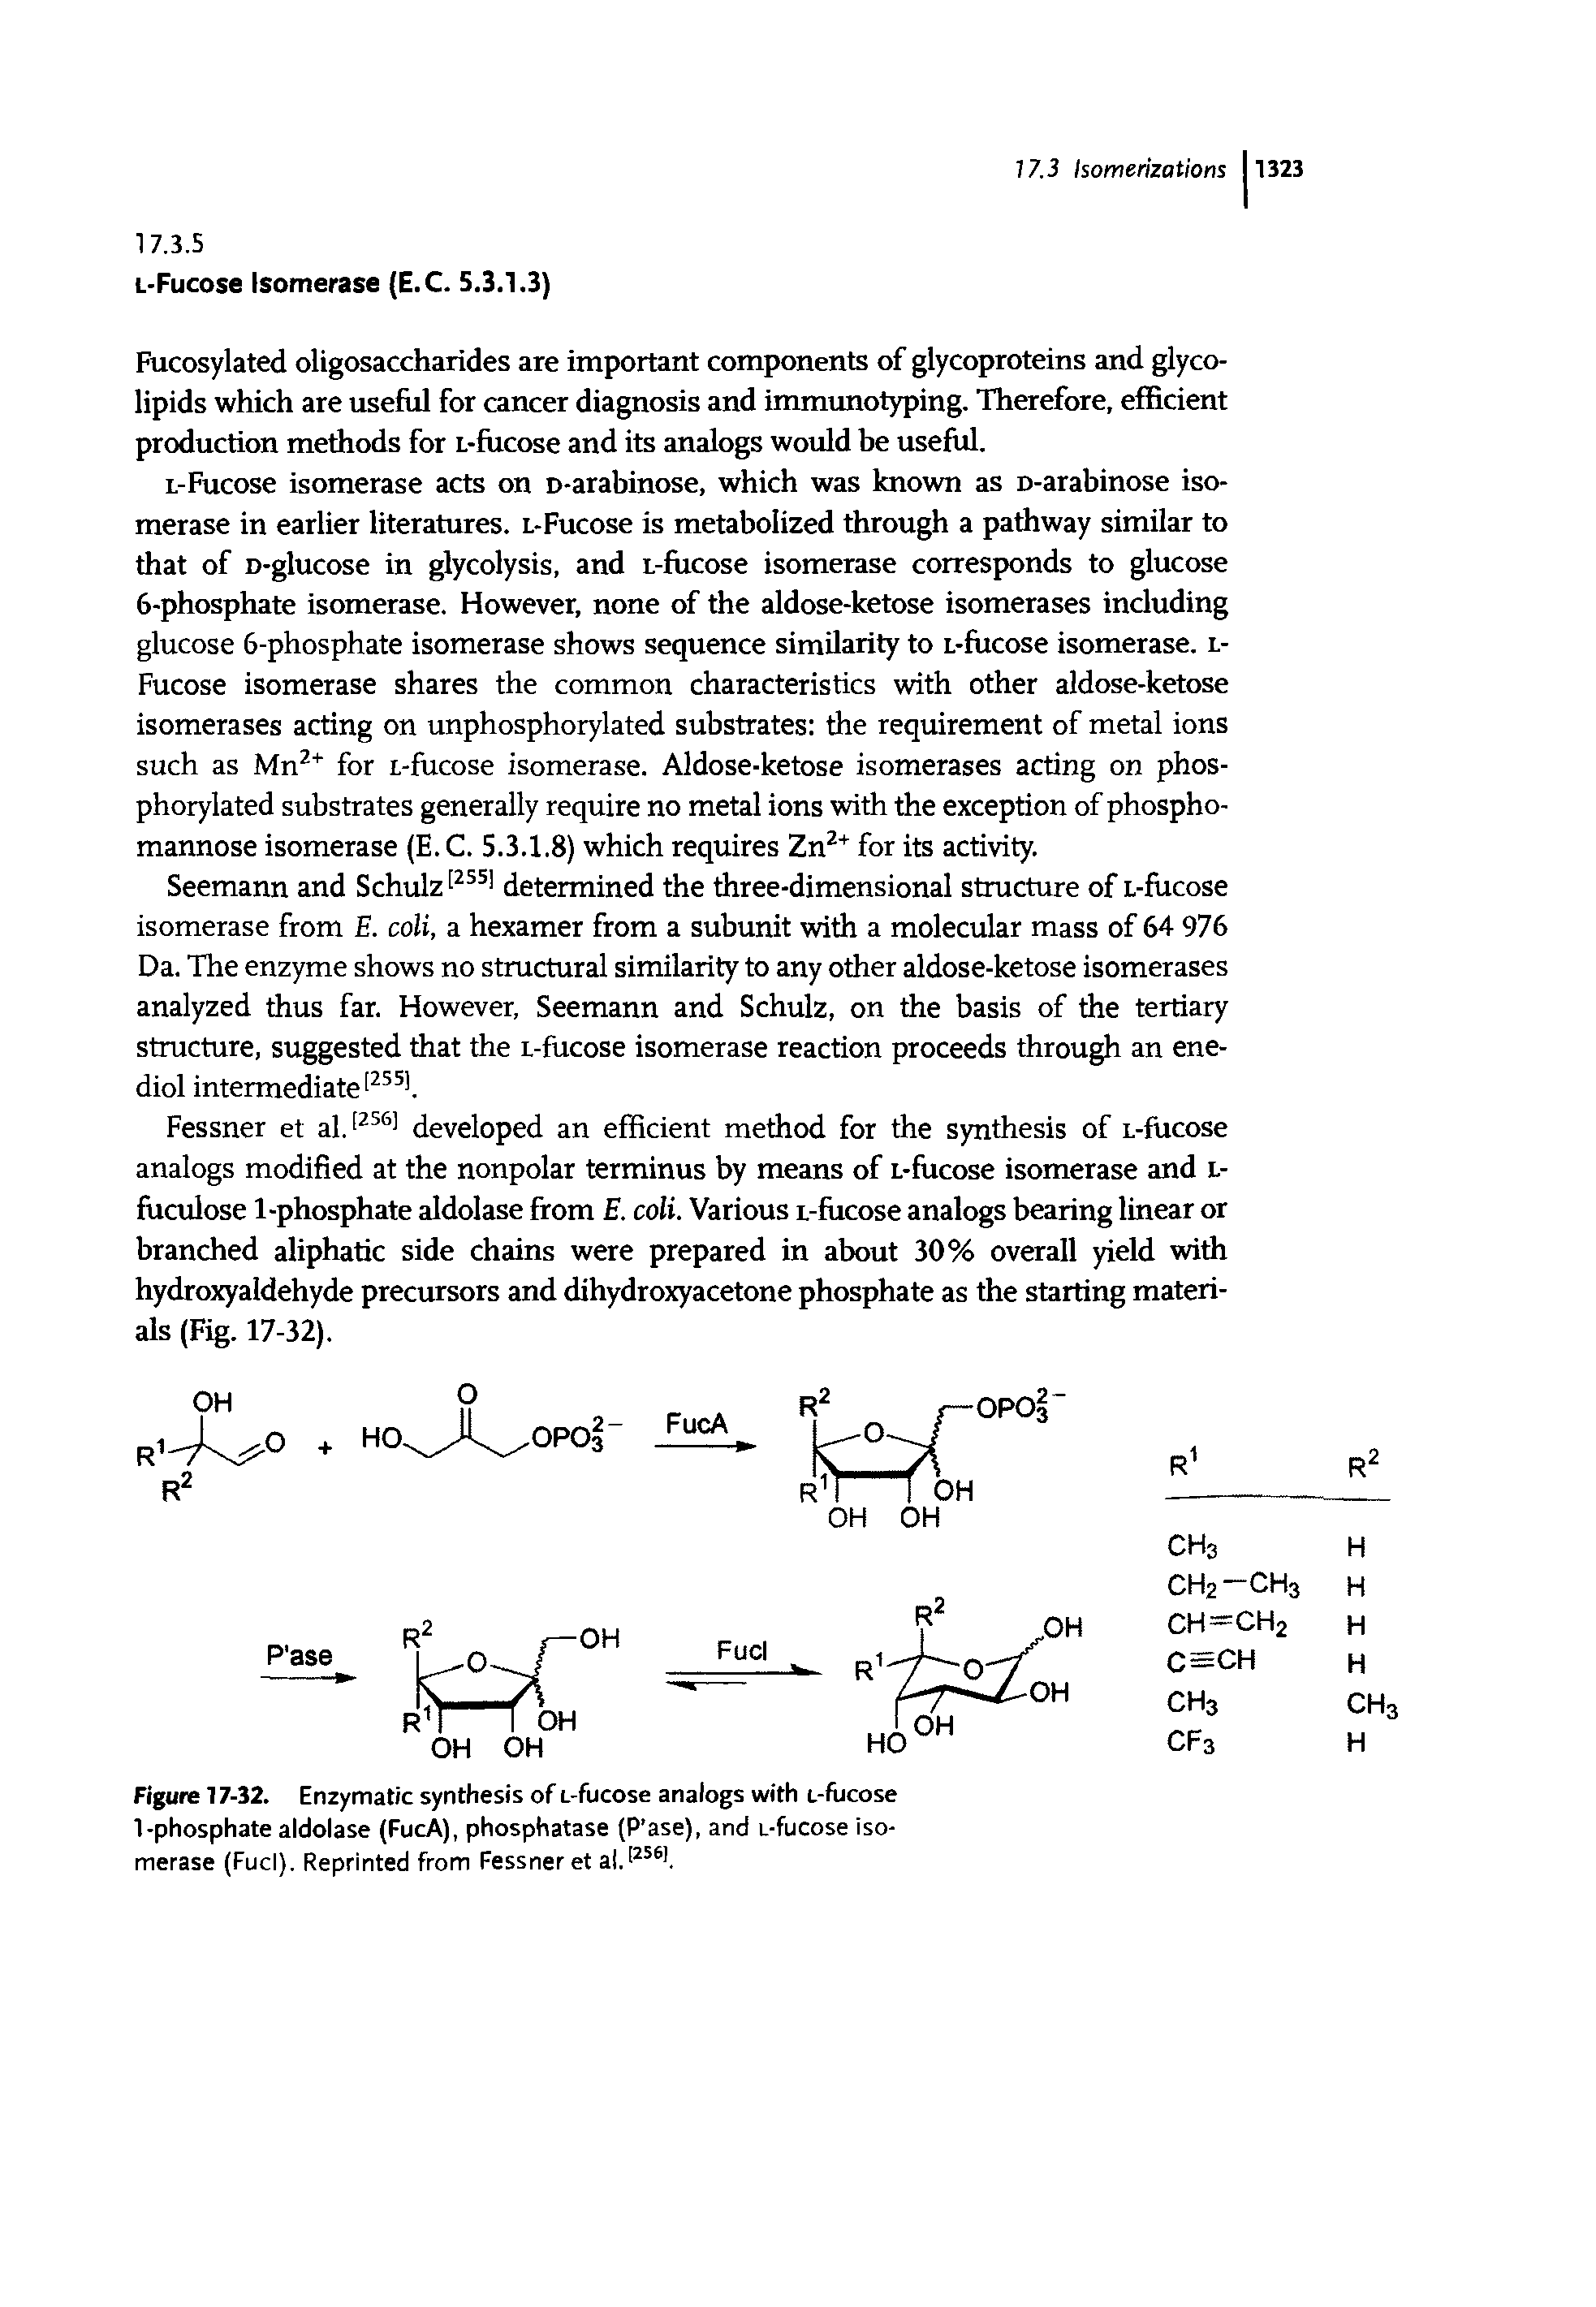 Figure 17-32. Enzymatic synthesis of L-fucose analogs with L-fucose 1-phosphate aldolase (FucA), phosphatase (P ase), and L-fucose isomerase (Fuel). Reprinted from Fessner et al.l2561.